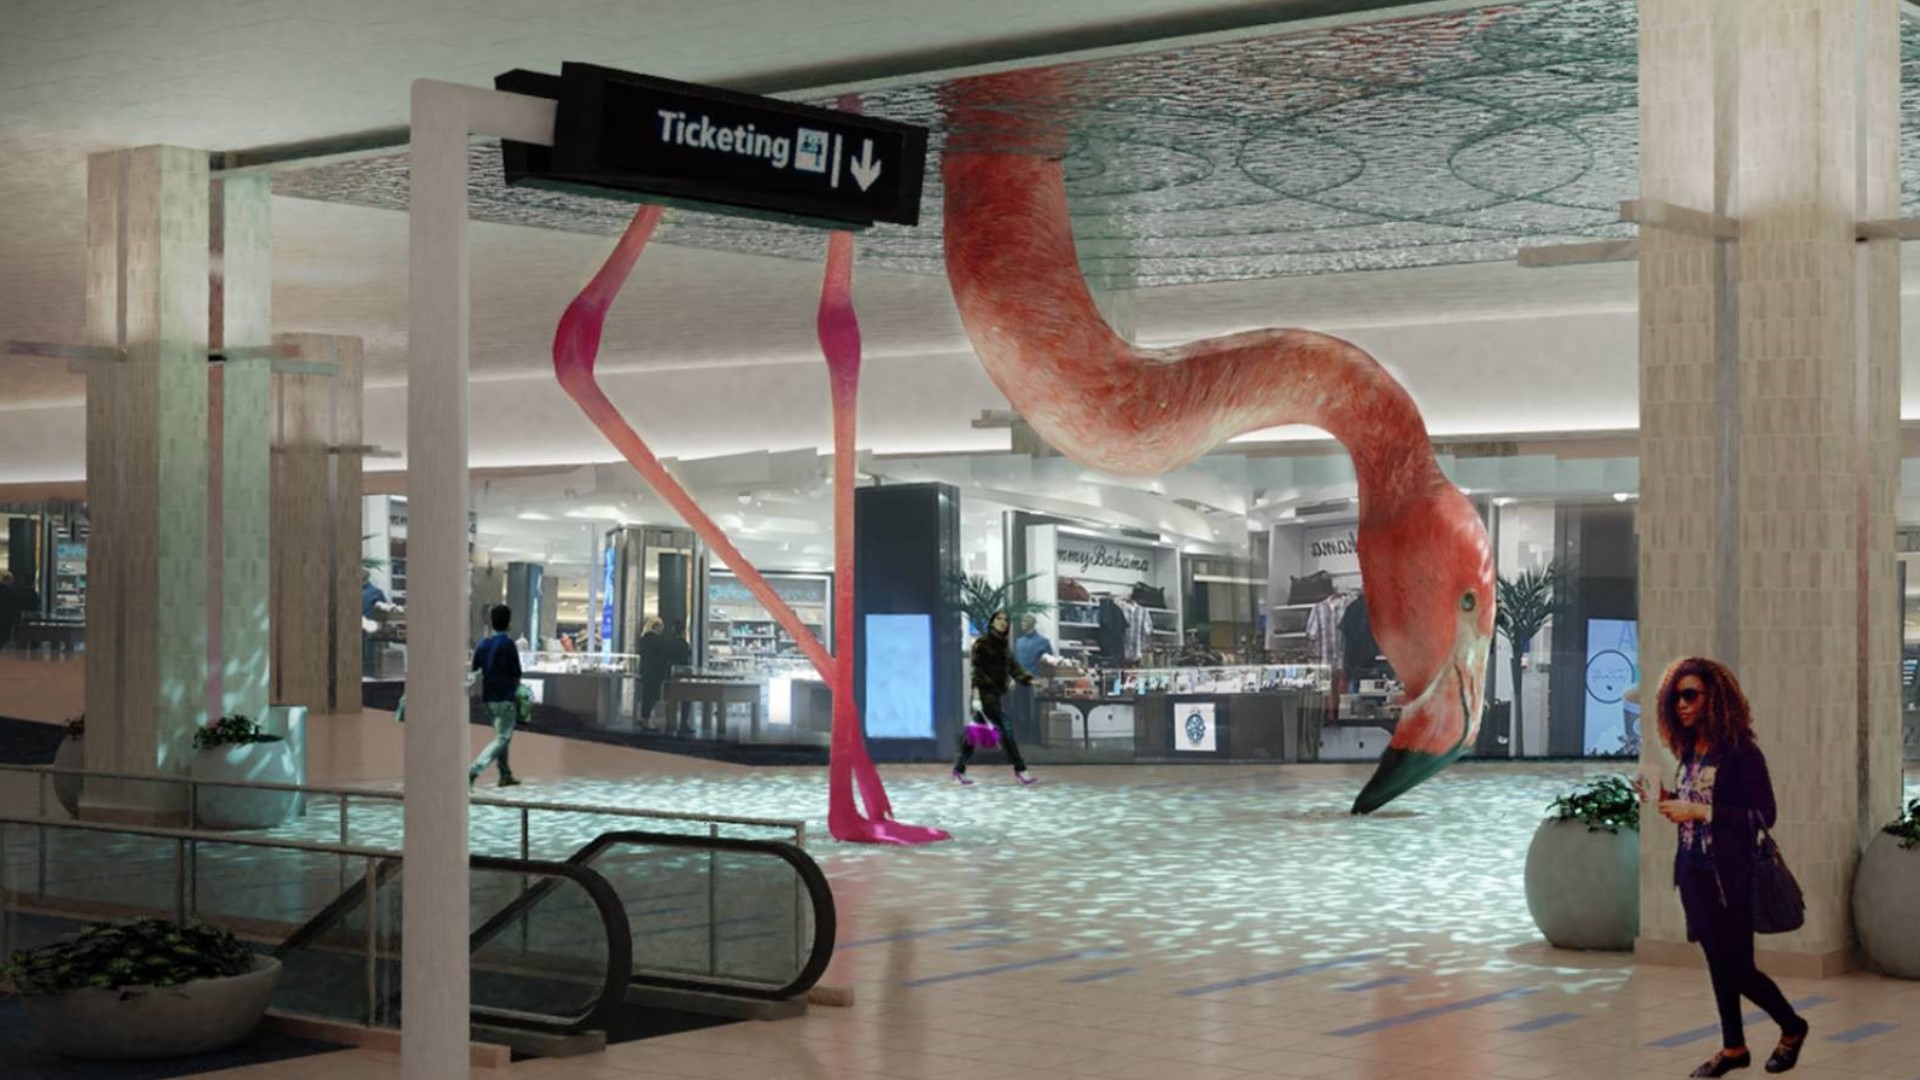 The airport first announced plans to the 21-foot art piece in March 2020.